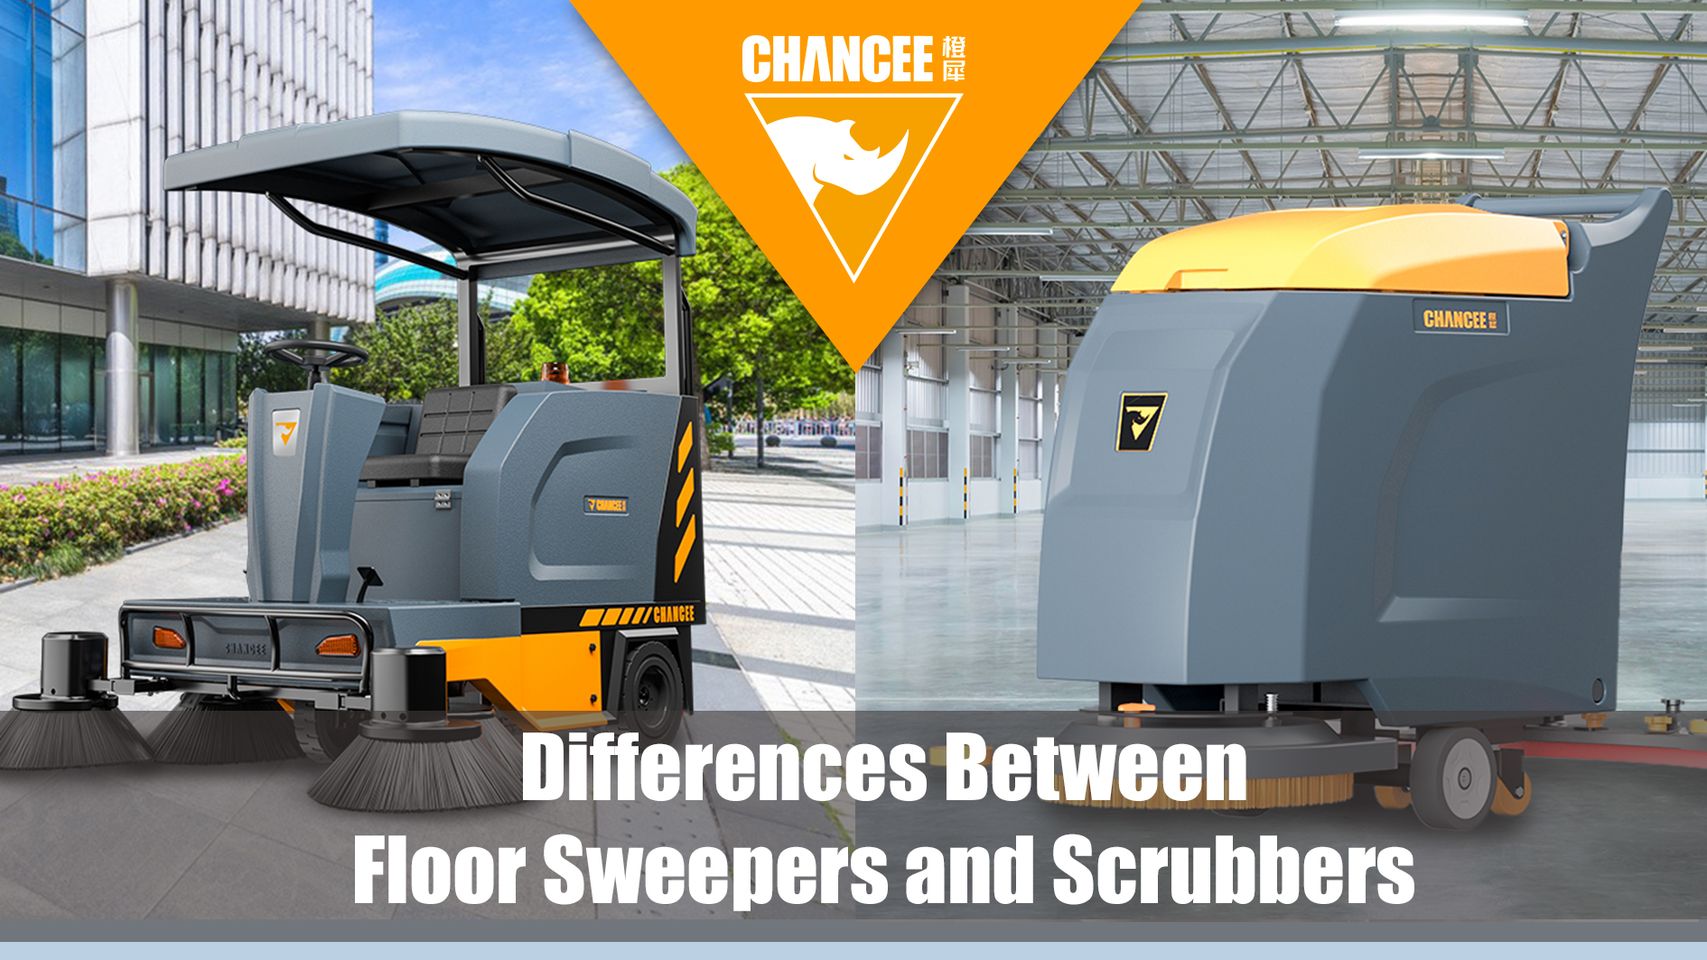 Floor Sweepers and Floor Scrubber in cleaning